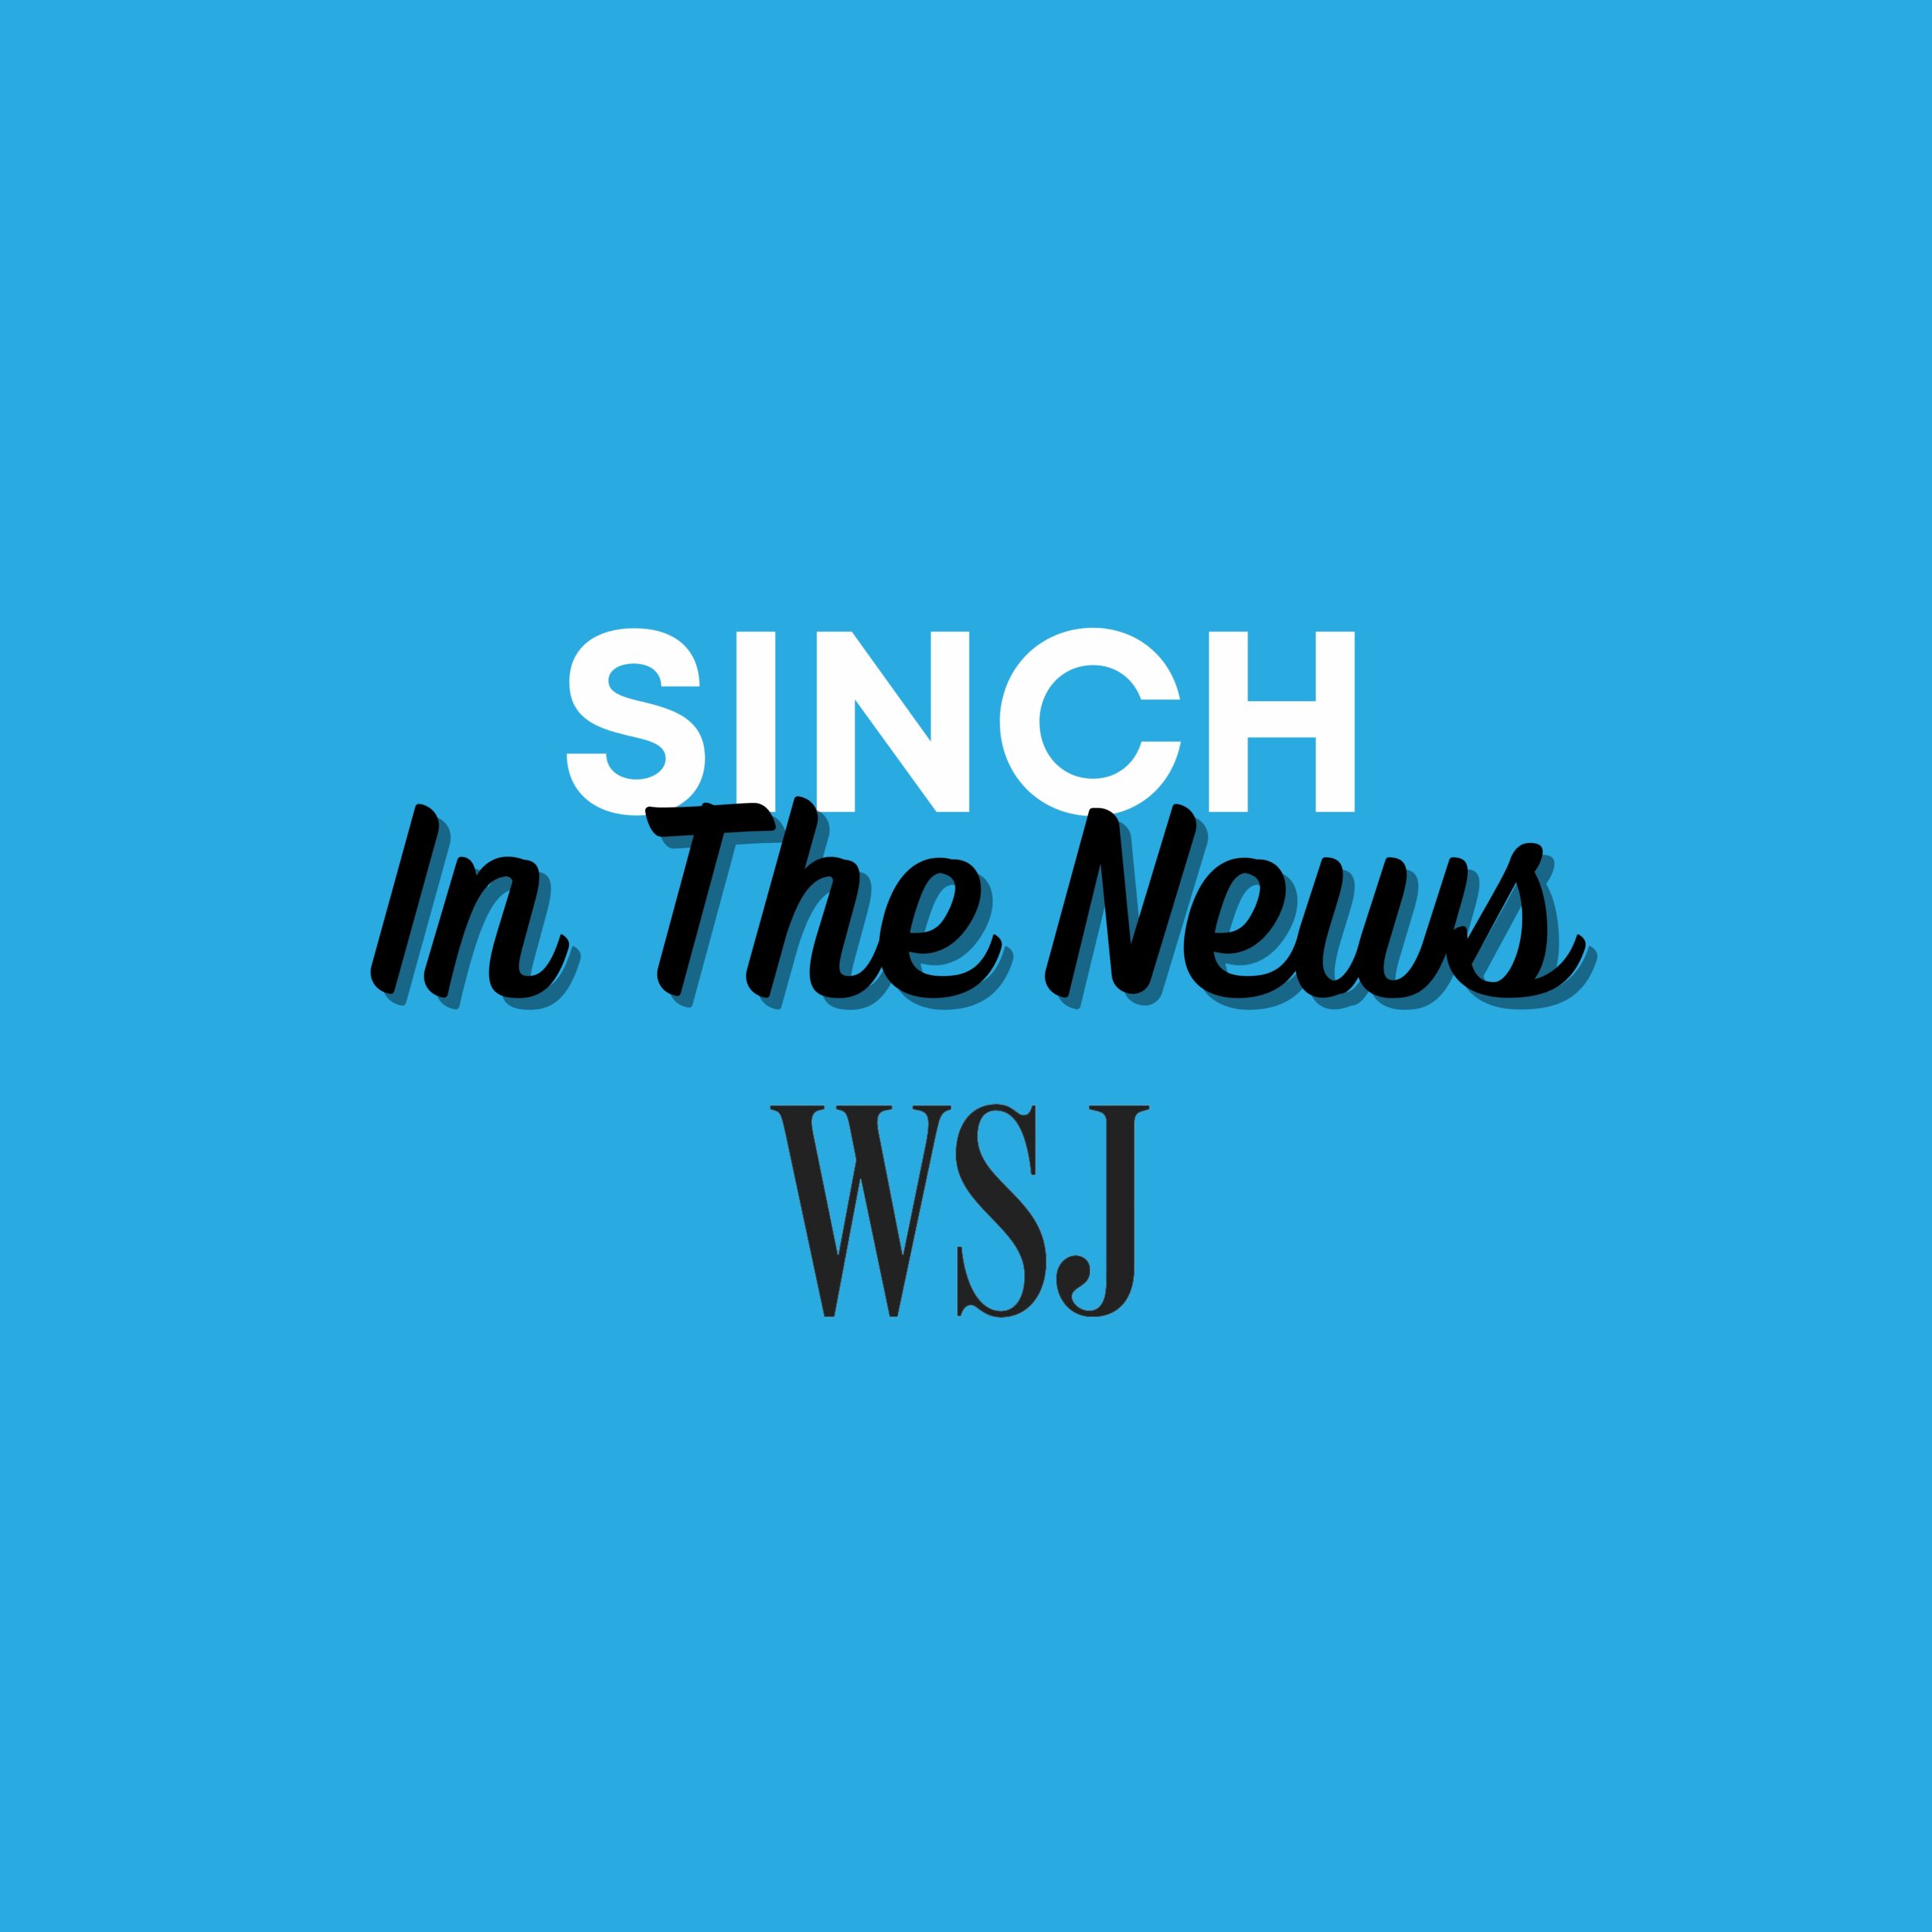 Sinch Featured in The Wall Street Journal